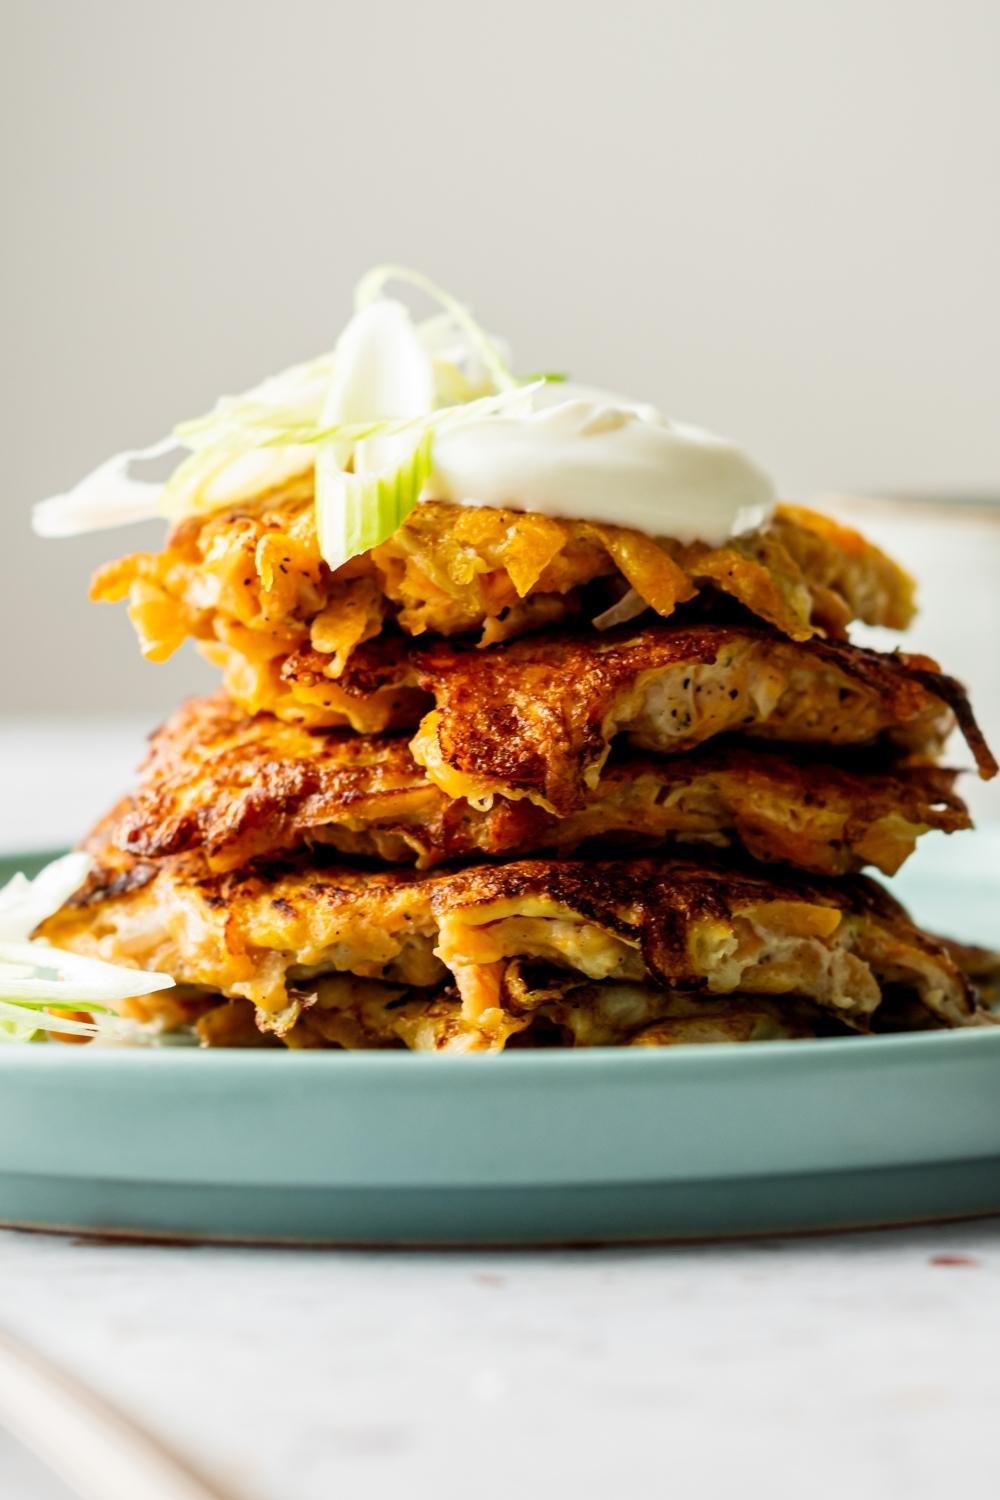 A dollop of sour cream on top of a stack of four sweet potato hash browns.